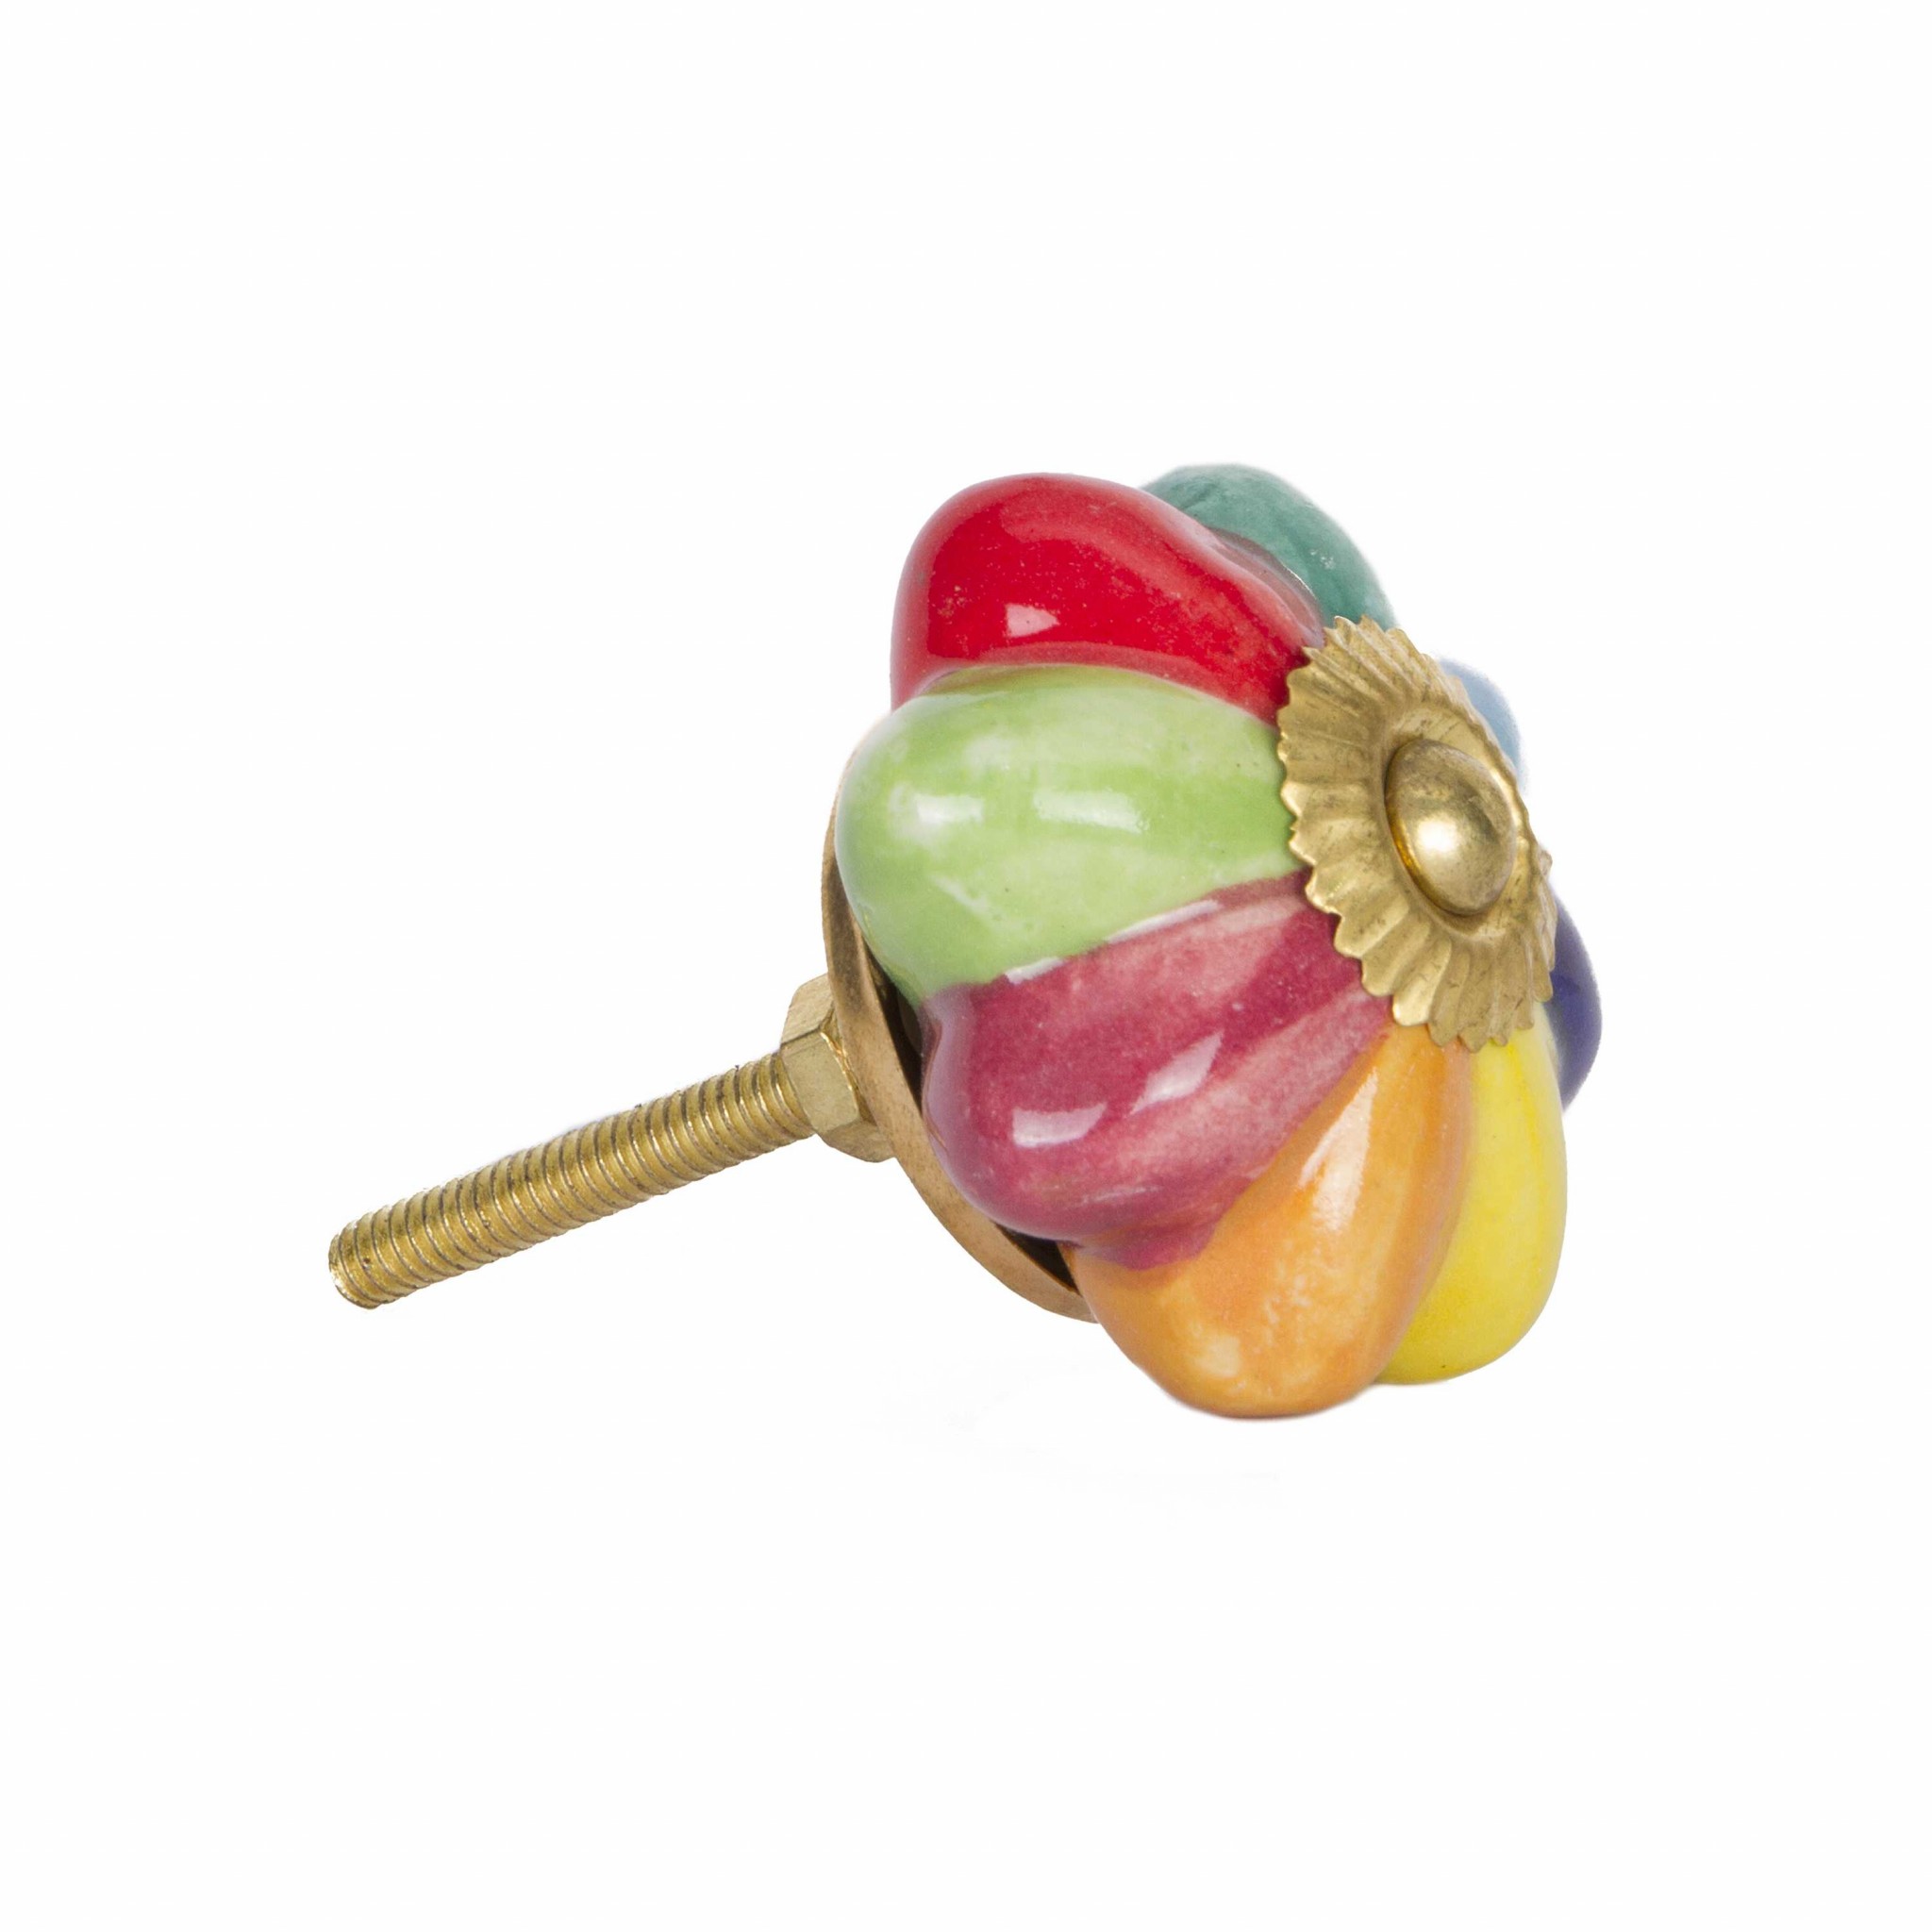 1.5" x 1.5" x 1.5" Green, Blue, Red and Yellow - Knobs 12-Pack